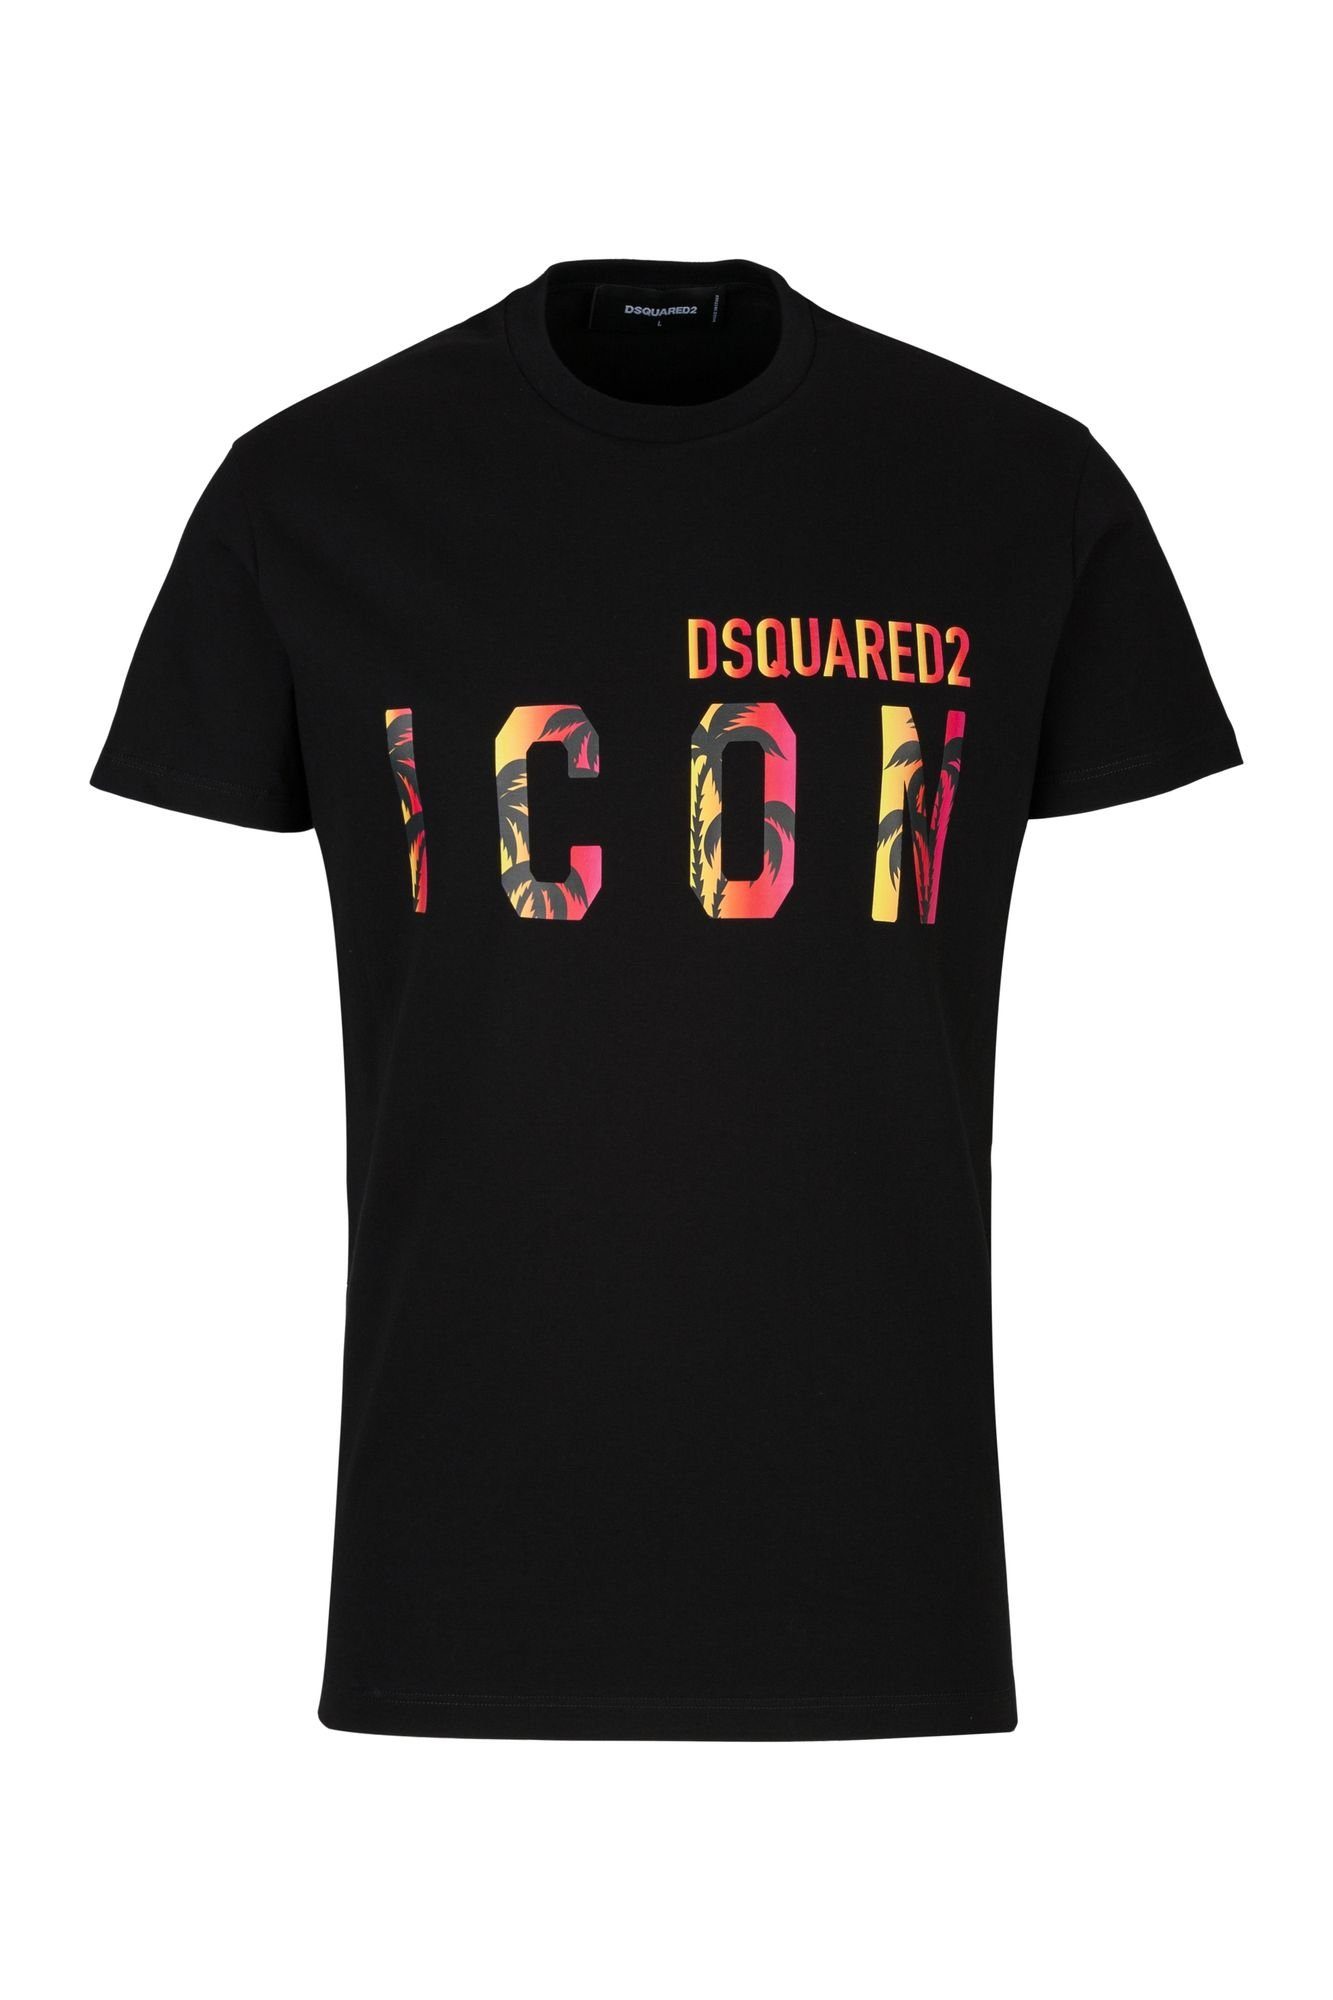 Cool Sunset Dsquared2 T-Shirt ICON